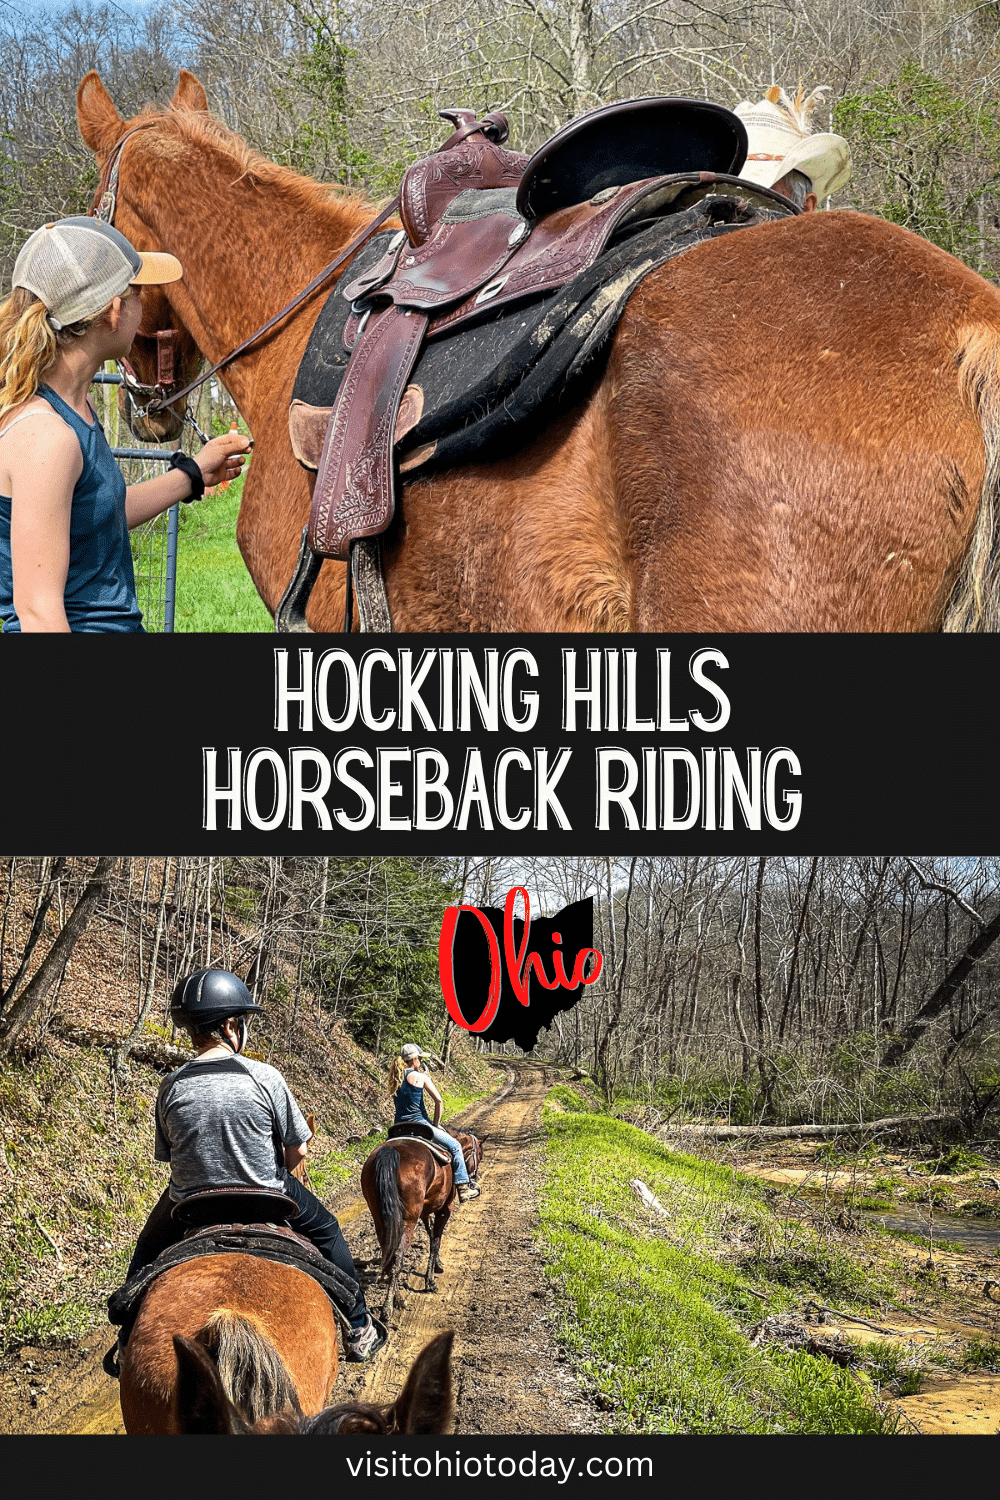 Hocking Hills has some of the best sights to view on horseback. Here’s our round-up of some of the best places to go Hocking Hills Horseback Riding!